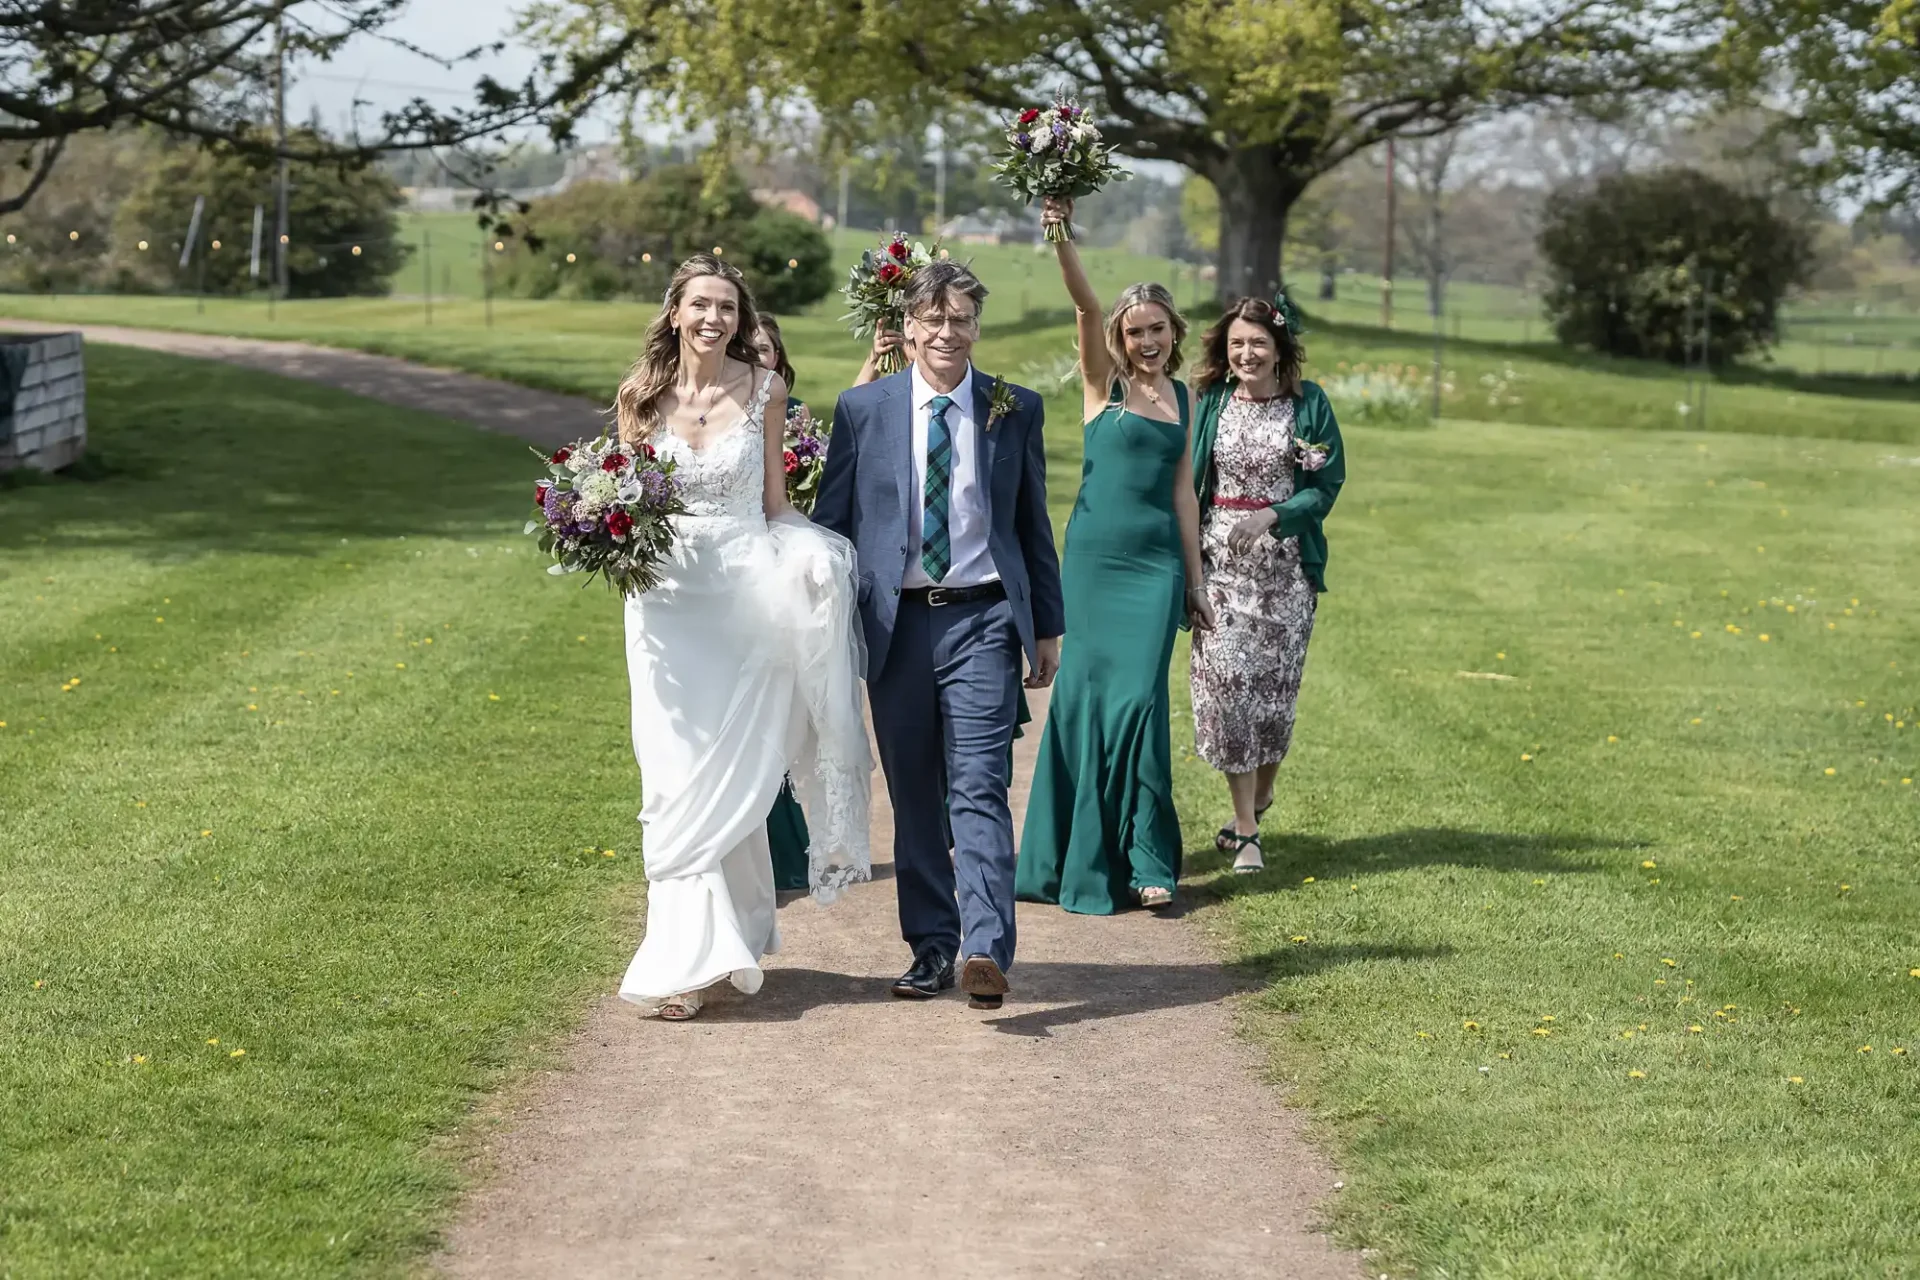 A newlywed couple walks outdoors, smiling, with three guests behind them. The bride holds a bouquet and wears a white dress; the groom is in a suit. The three guests wear green dresses and a patterned dress.